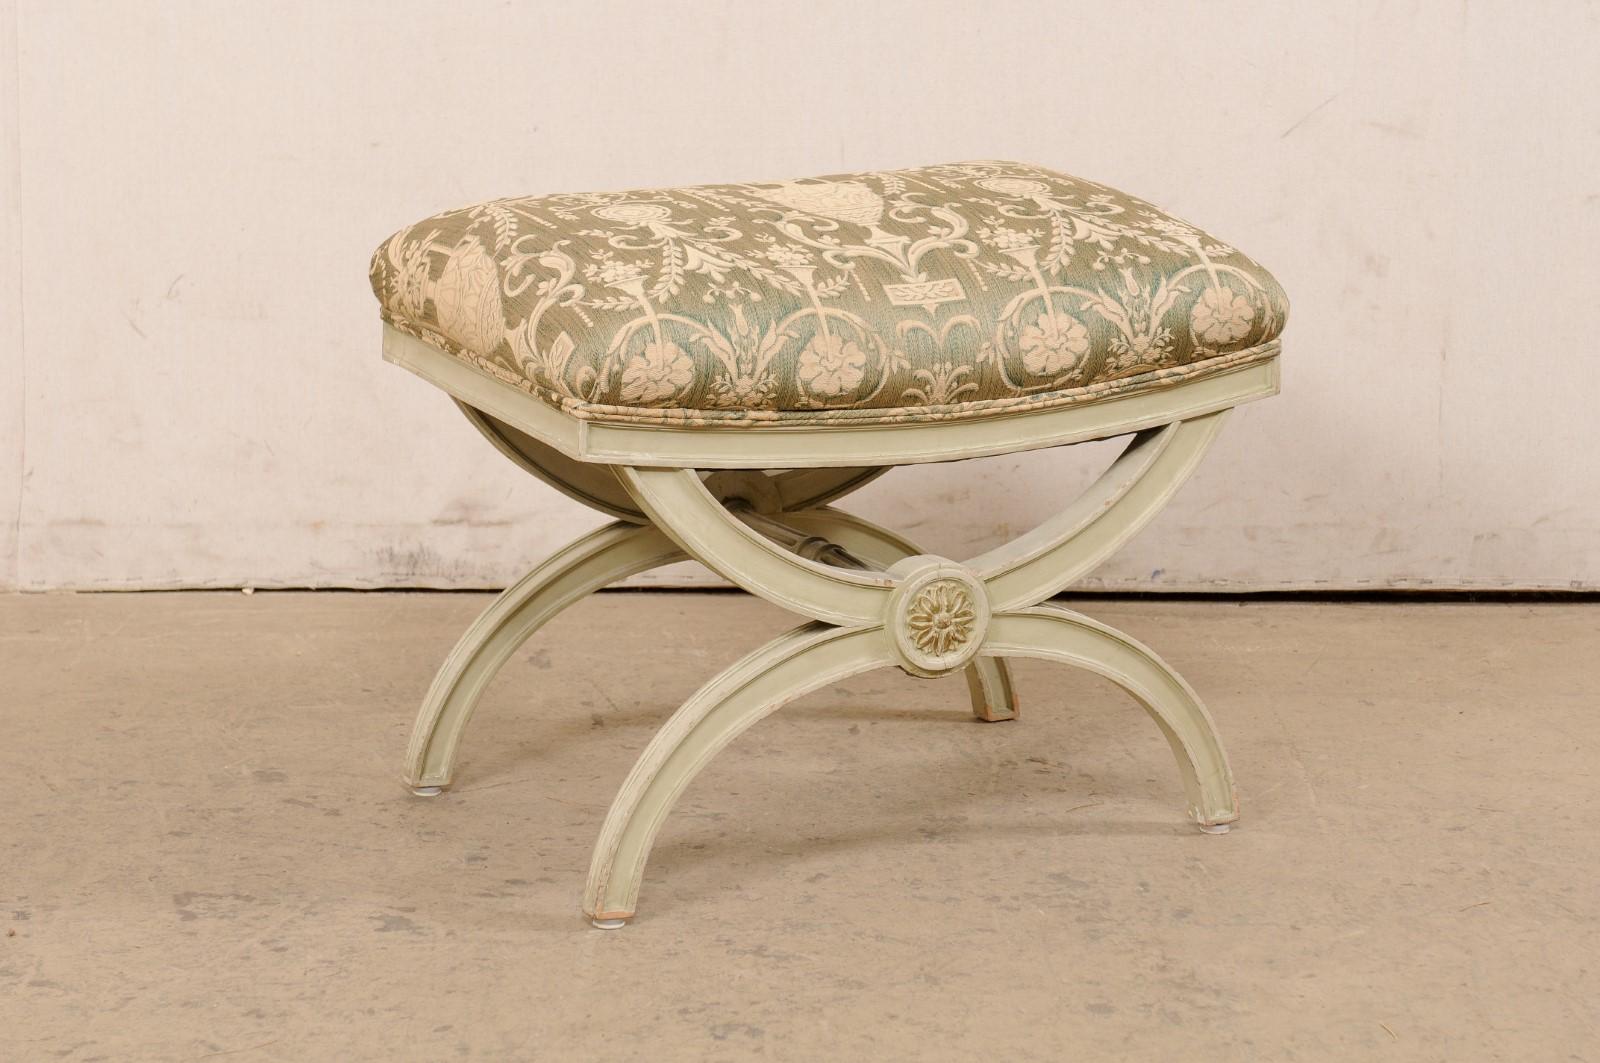 An Italian painted wood stool with upholstered seat from the mid 20th century. This vintage stool from Italy has been created in the Curule (or often referred to as Dante) style, featuring legs comprised of two half-moon shapes, which attach at